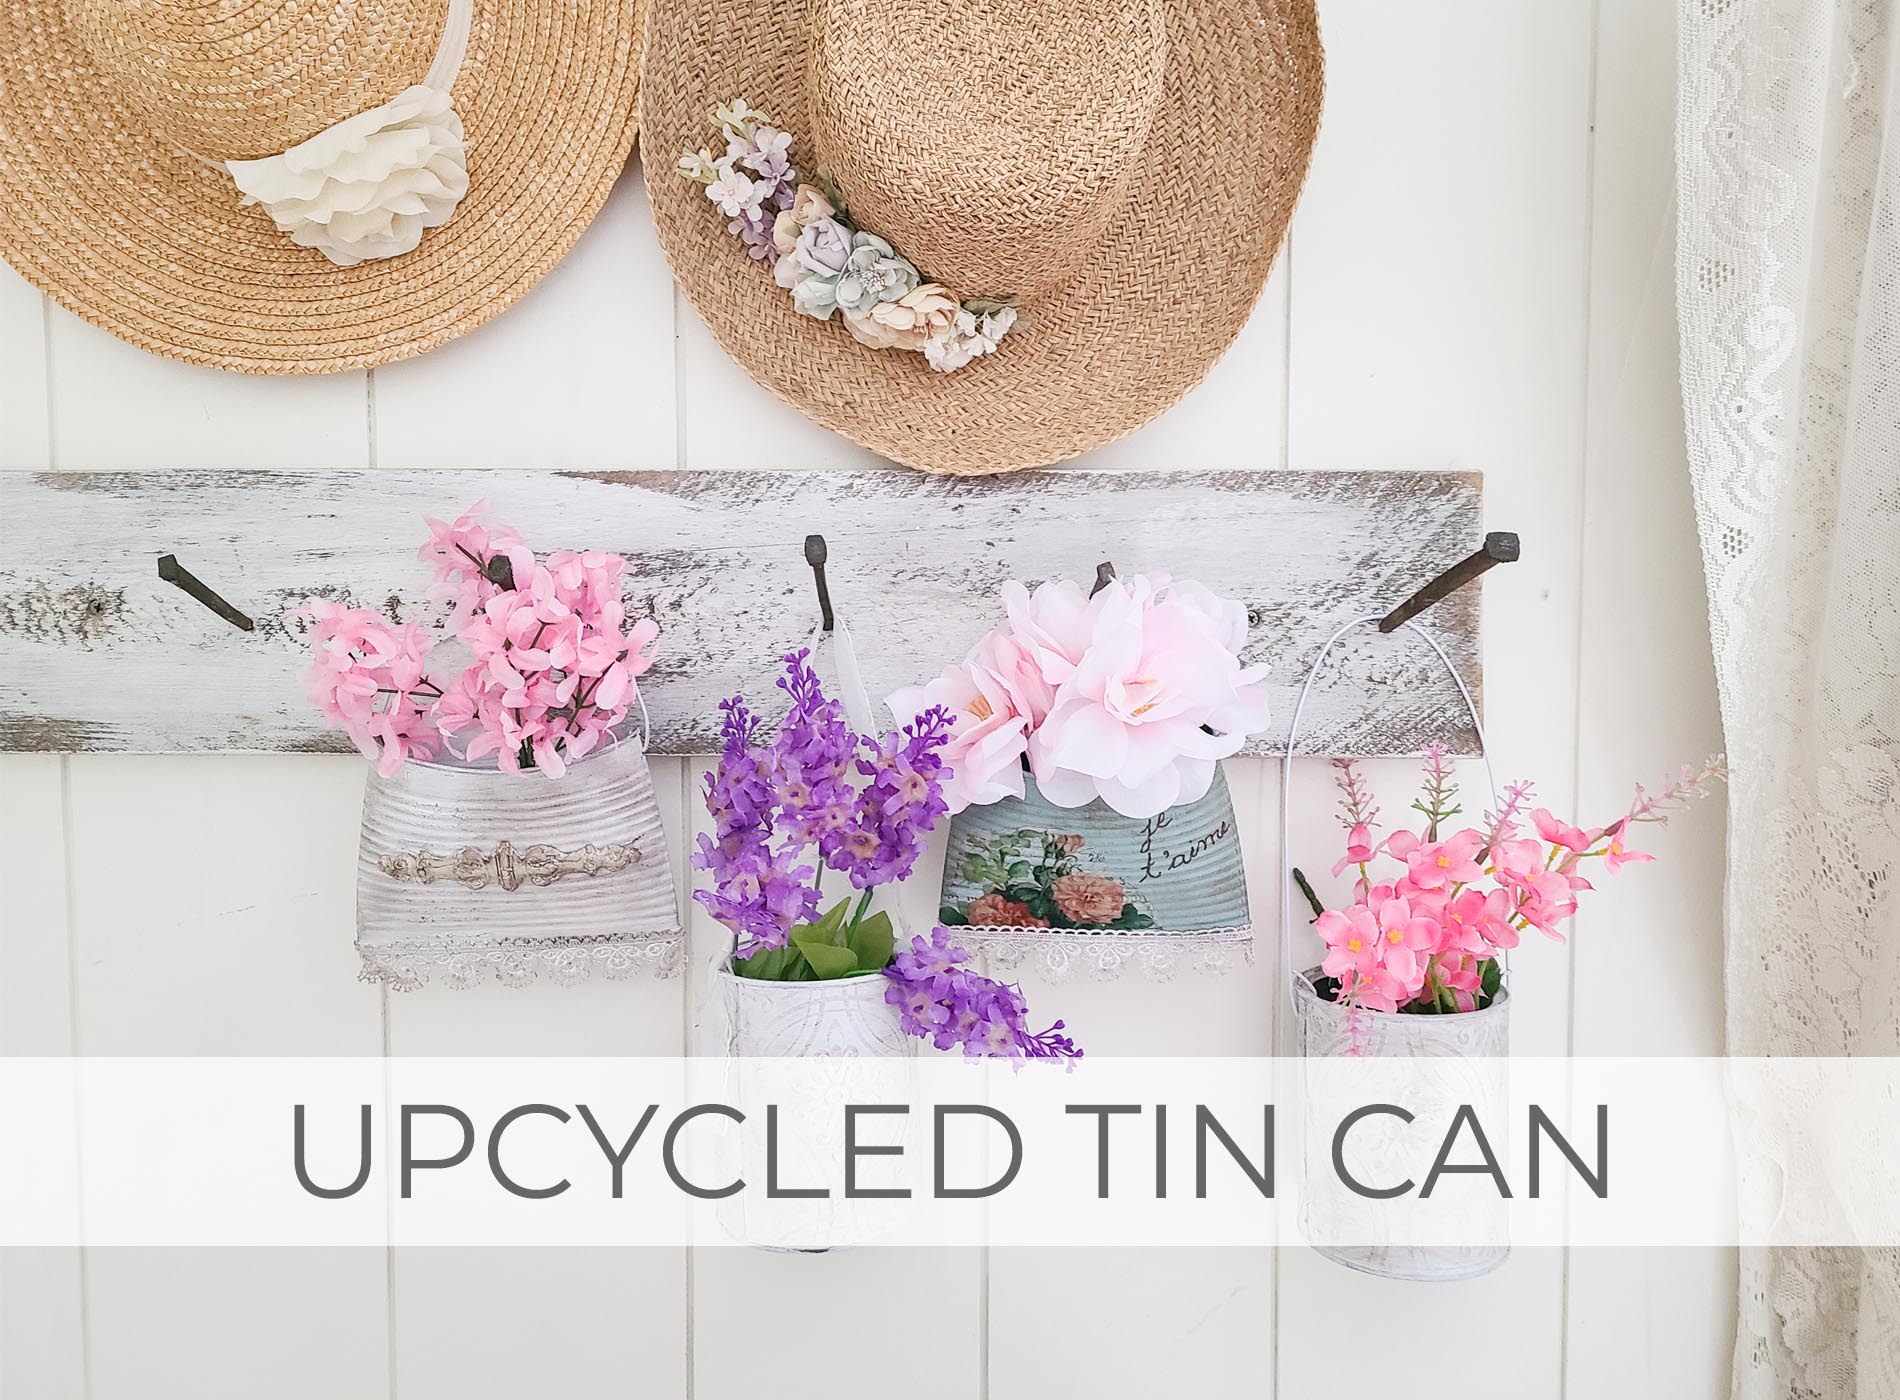 Showcase of Upcycled Tin Can by Larissa of Prodigal Pieces | prodigalpieces.com #prodigalpieces